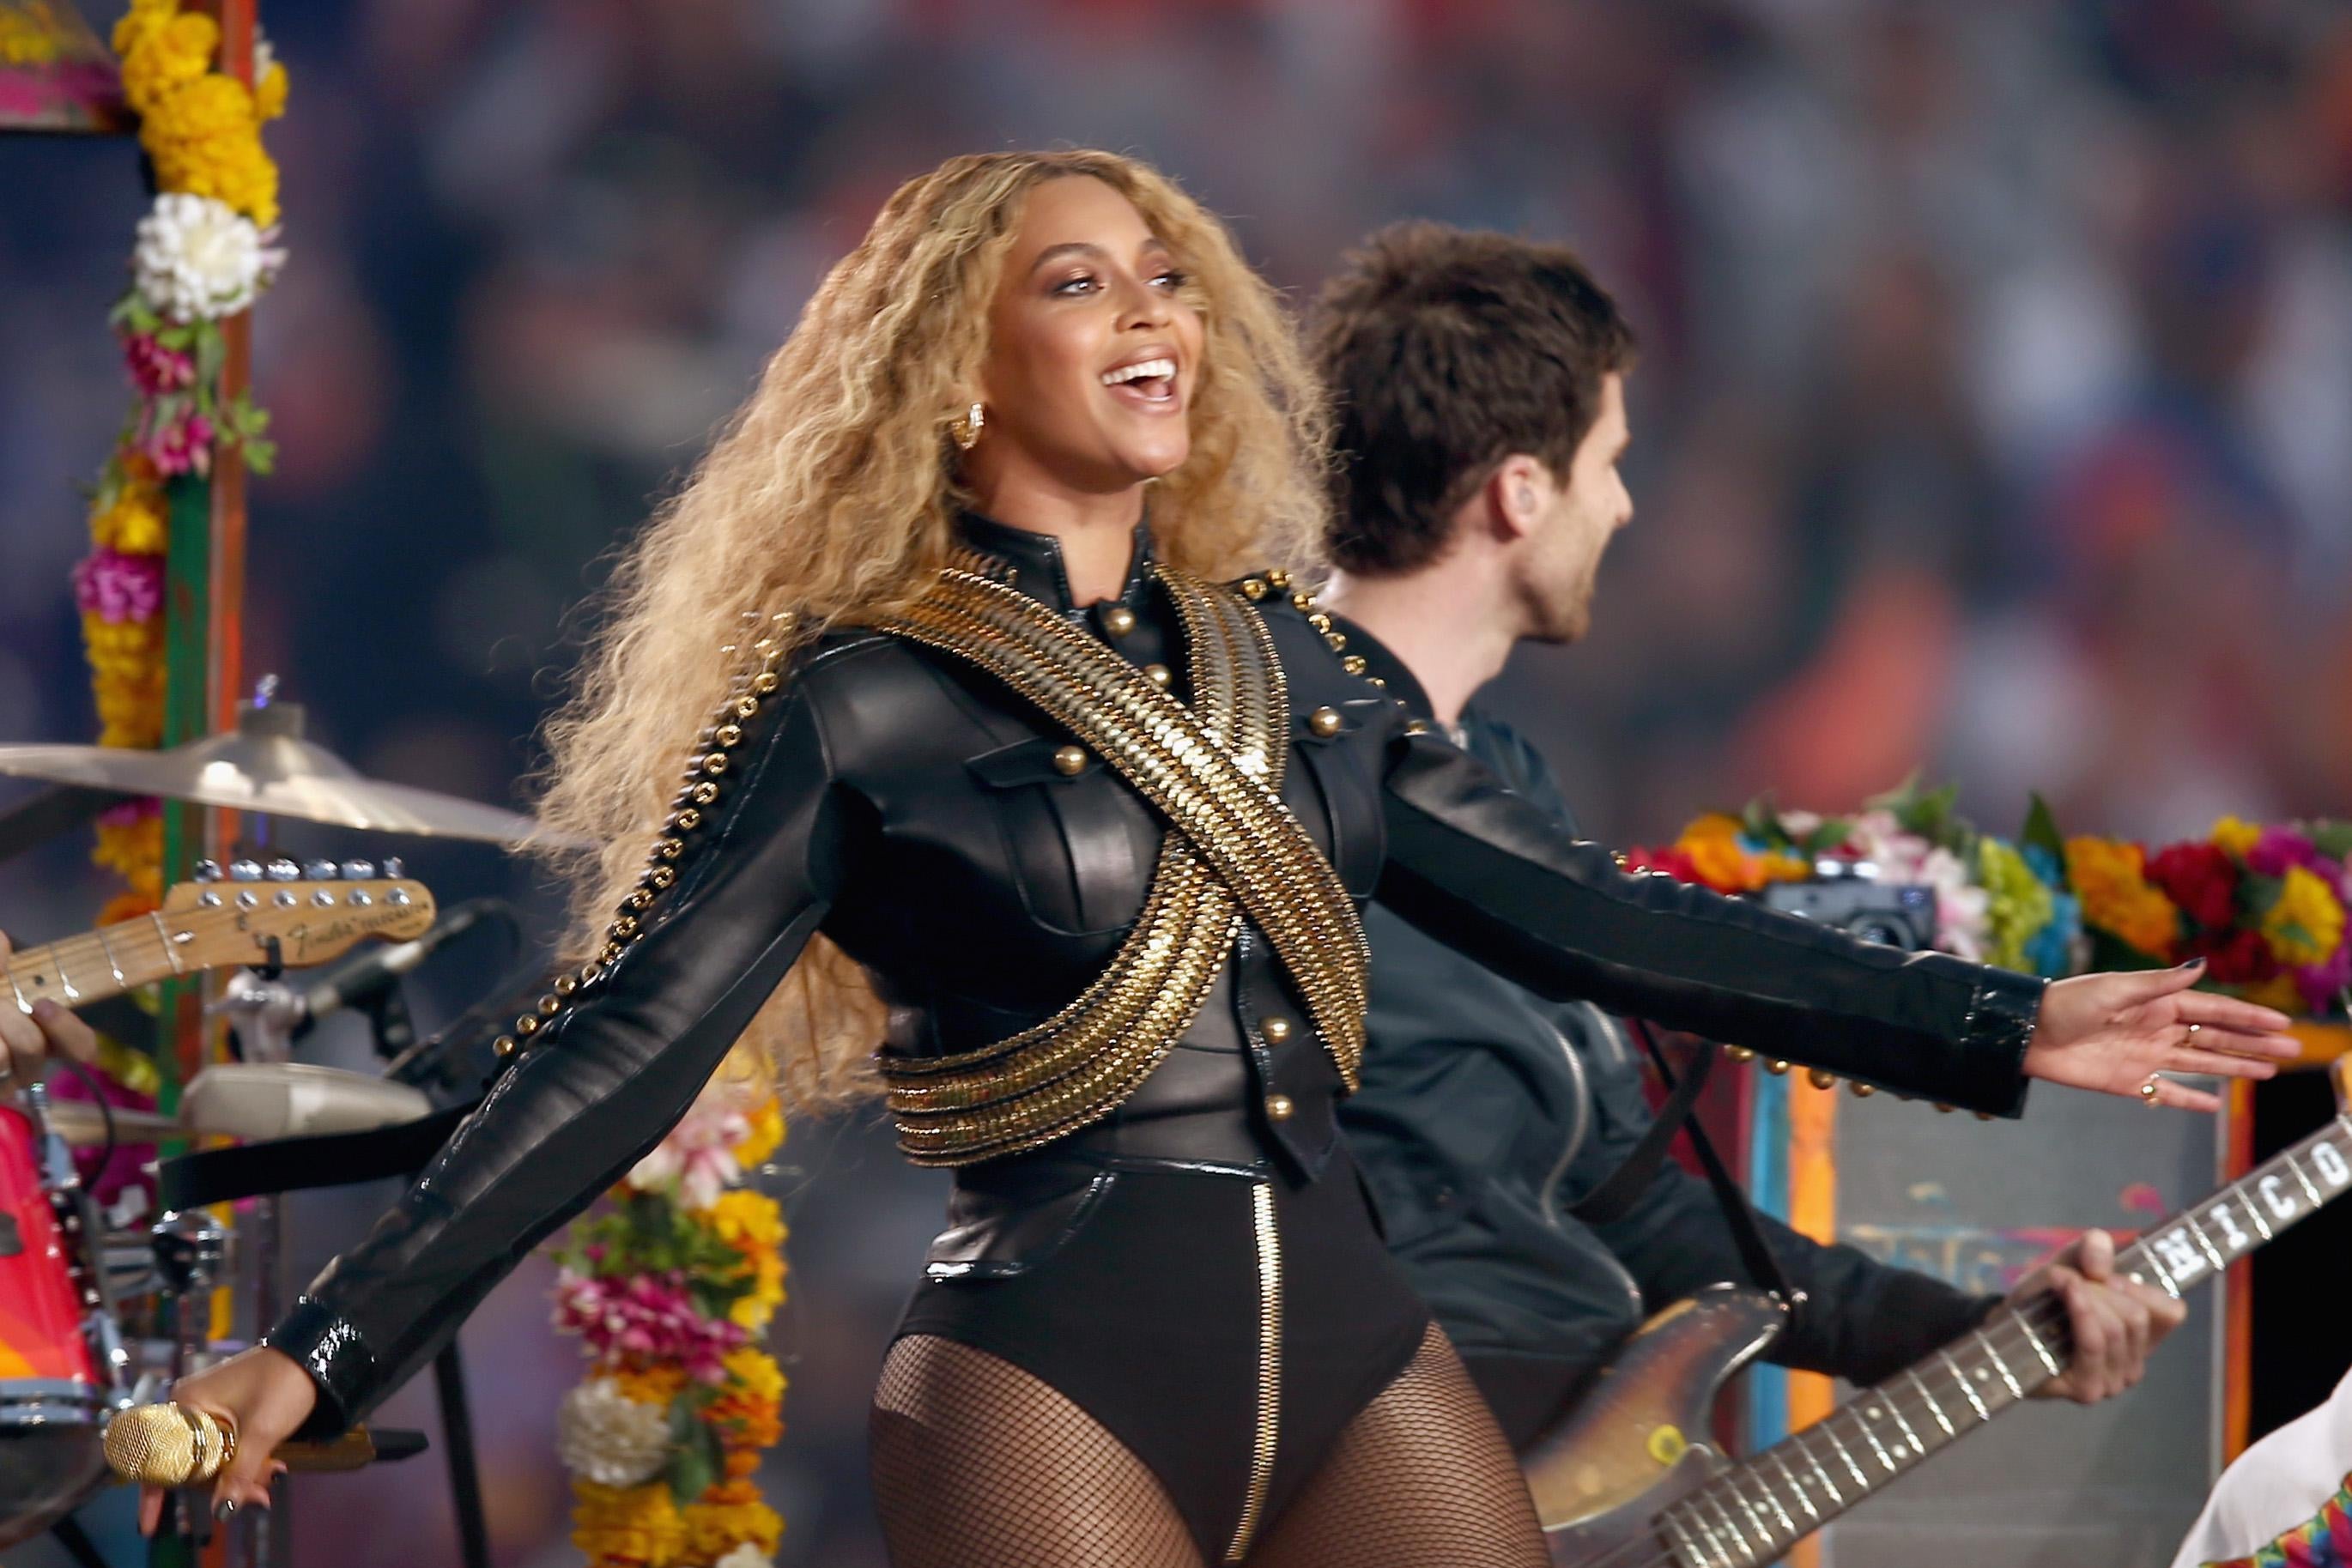 Beyonce performs onstage during the Super Bowl 50 Halftime Show on February 7, 2016 in Santa Clara, California.  